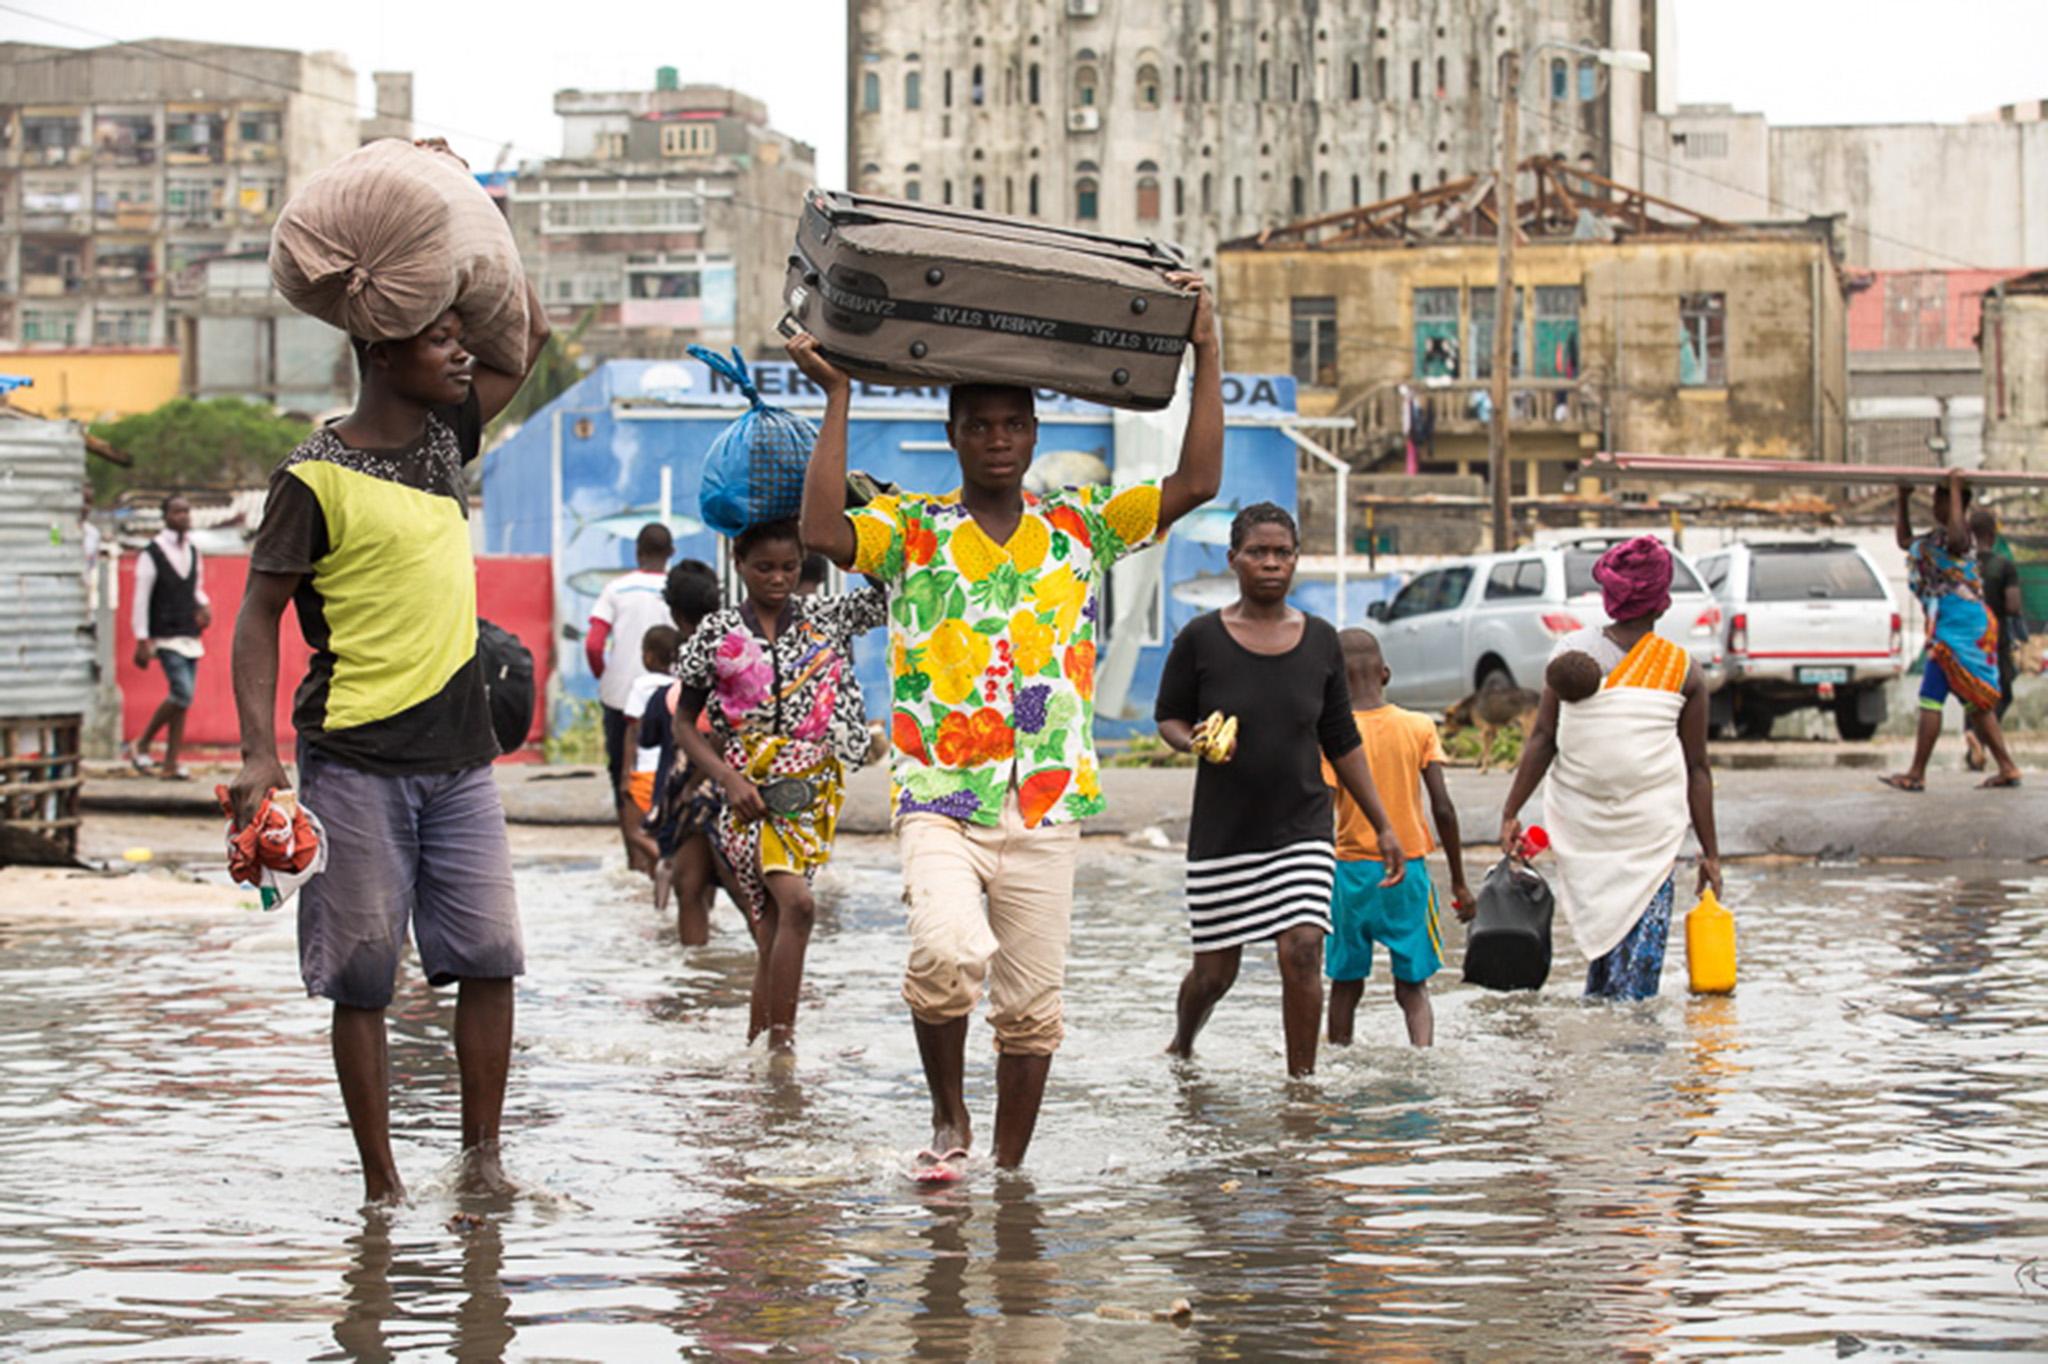 Residents of Beira in Mozambique carry their belongings through floodwater this week